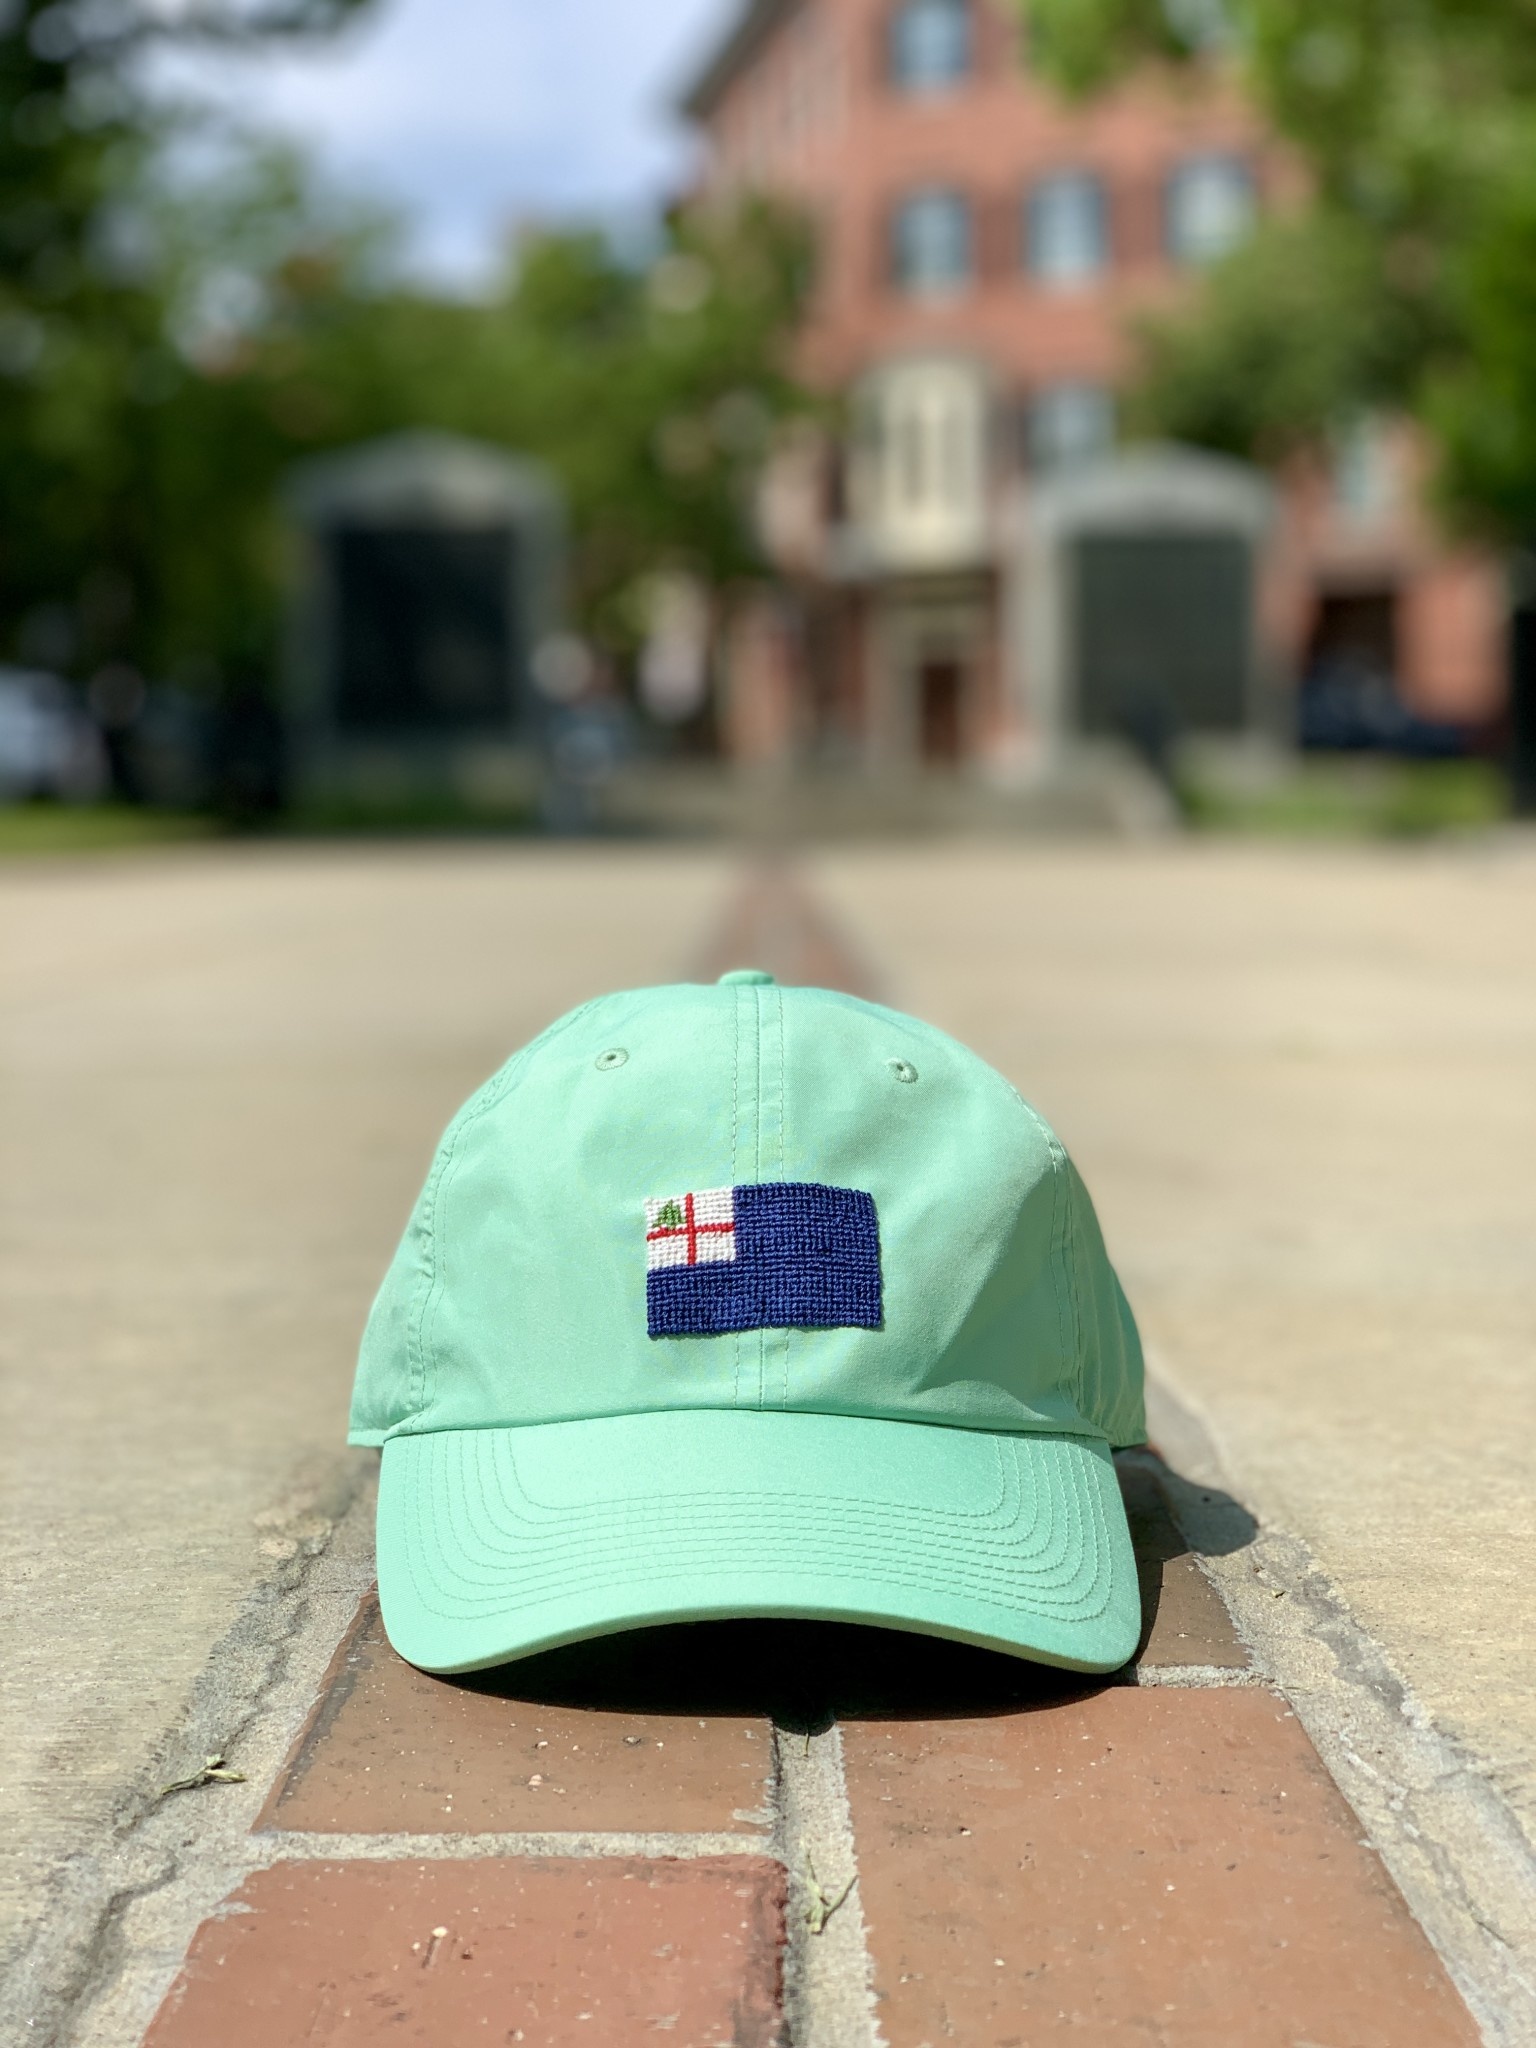 Bunker Hill Performace Flag Hat in Seafoam - Place and Gather